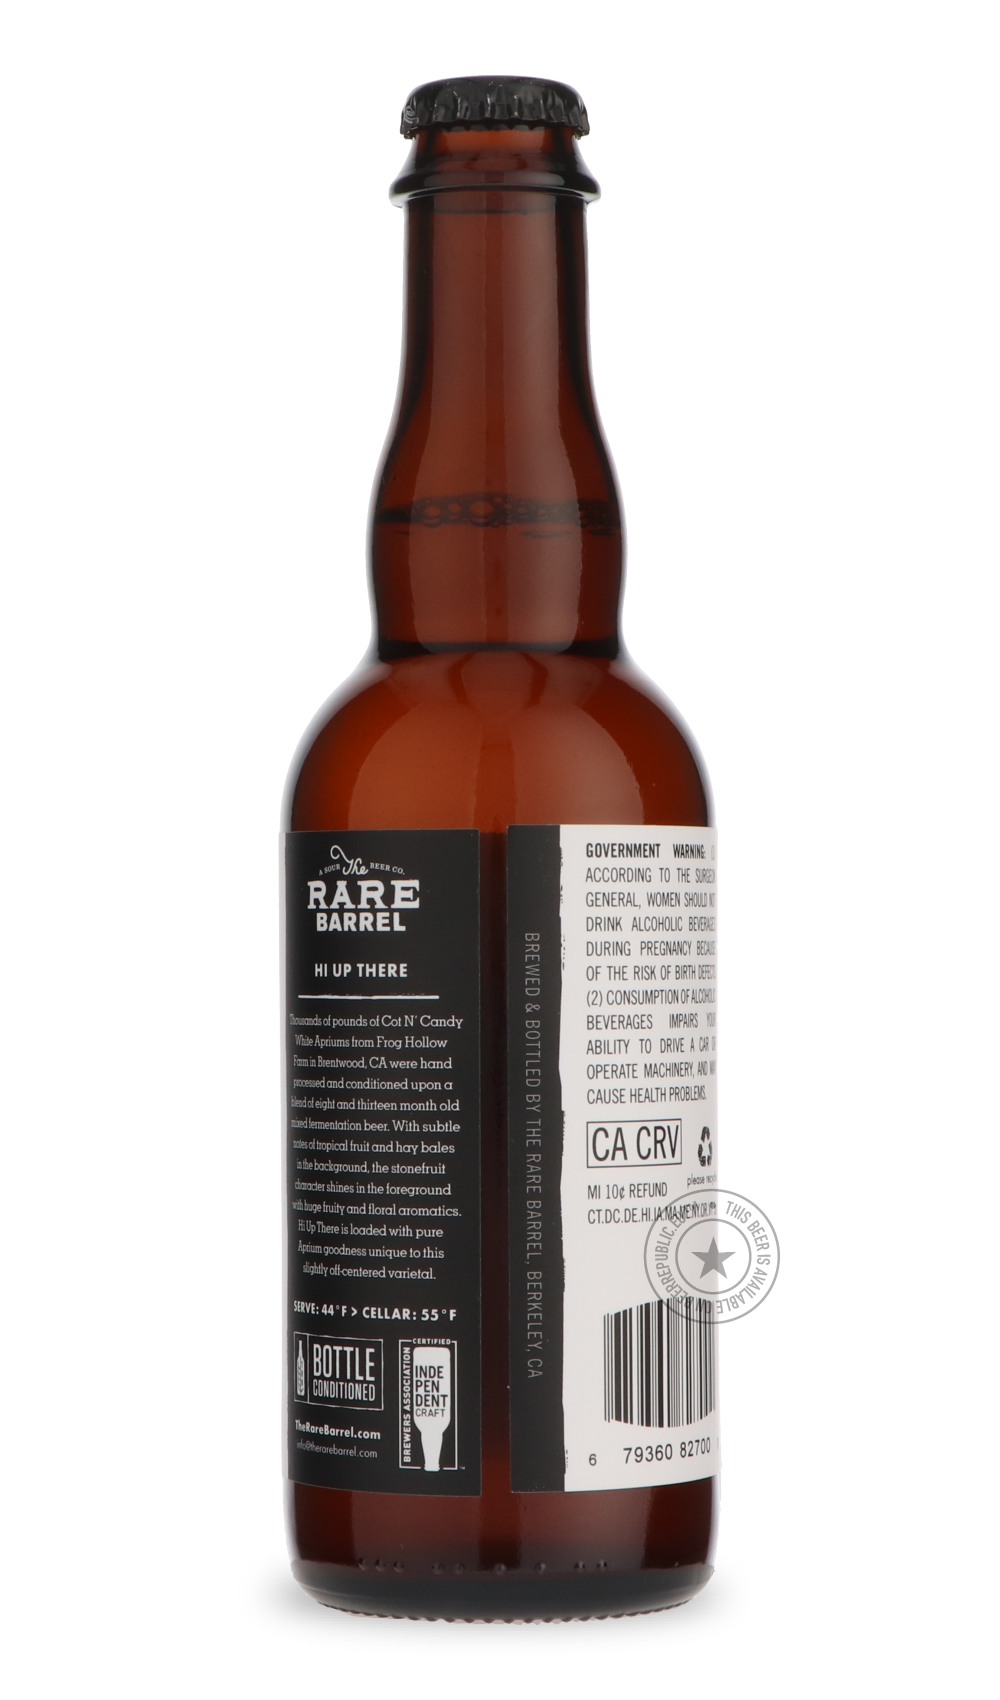 -The Rare Barrel- Hi Up There-Sour / Wild & Fruity- Only @ Beer Republic - The best online beer store for American & Canadian craft beer - Buy beer online from the USA and Canada - Bier online kopen - Amerikaans bier kopen - Craft beer store - Craft beer kopen - Amerikanisch bier kaufen - Bier online kaufen - Acheter biere online - IPA - Stout - Porter - New England IPA - Hazy IPA - Imperial Stout - Barrel Aged - Barrel Aged Imperial Stout - Brown - Dark beer - Blond - Blonde - Pilsner - Lager - Wheat - Wei